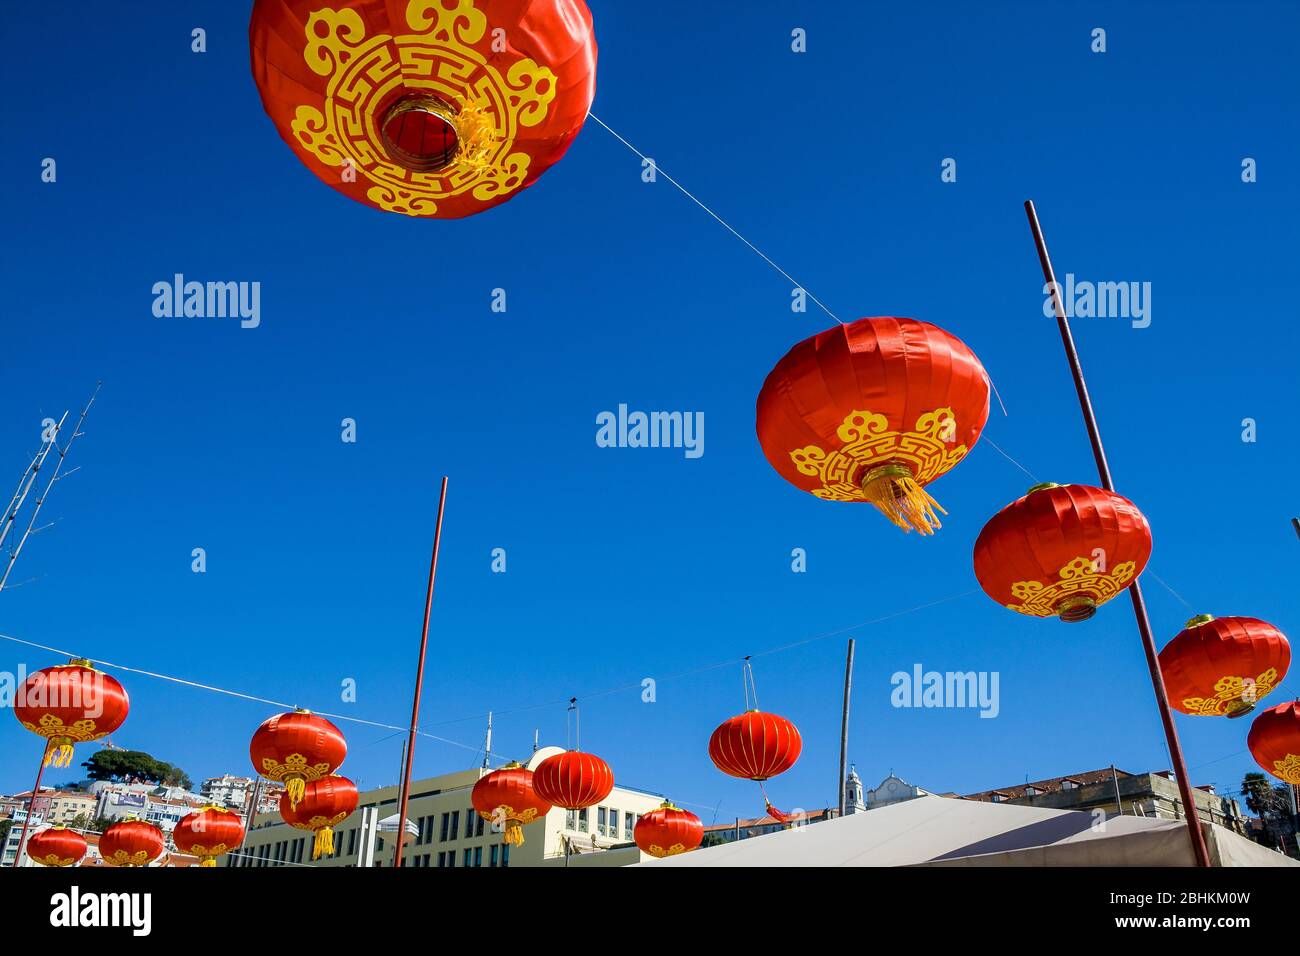 Chinese lantern against a blue sky in the Chinese district of Lisbon, Portugal Stock Photo